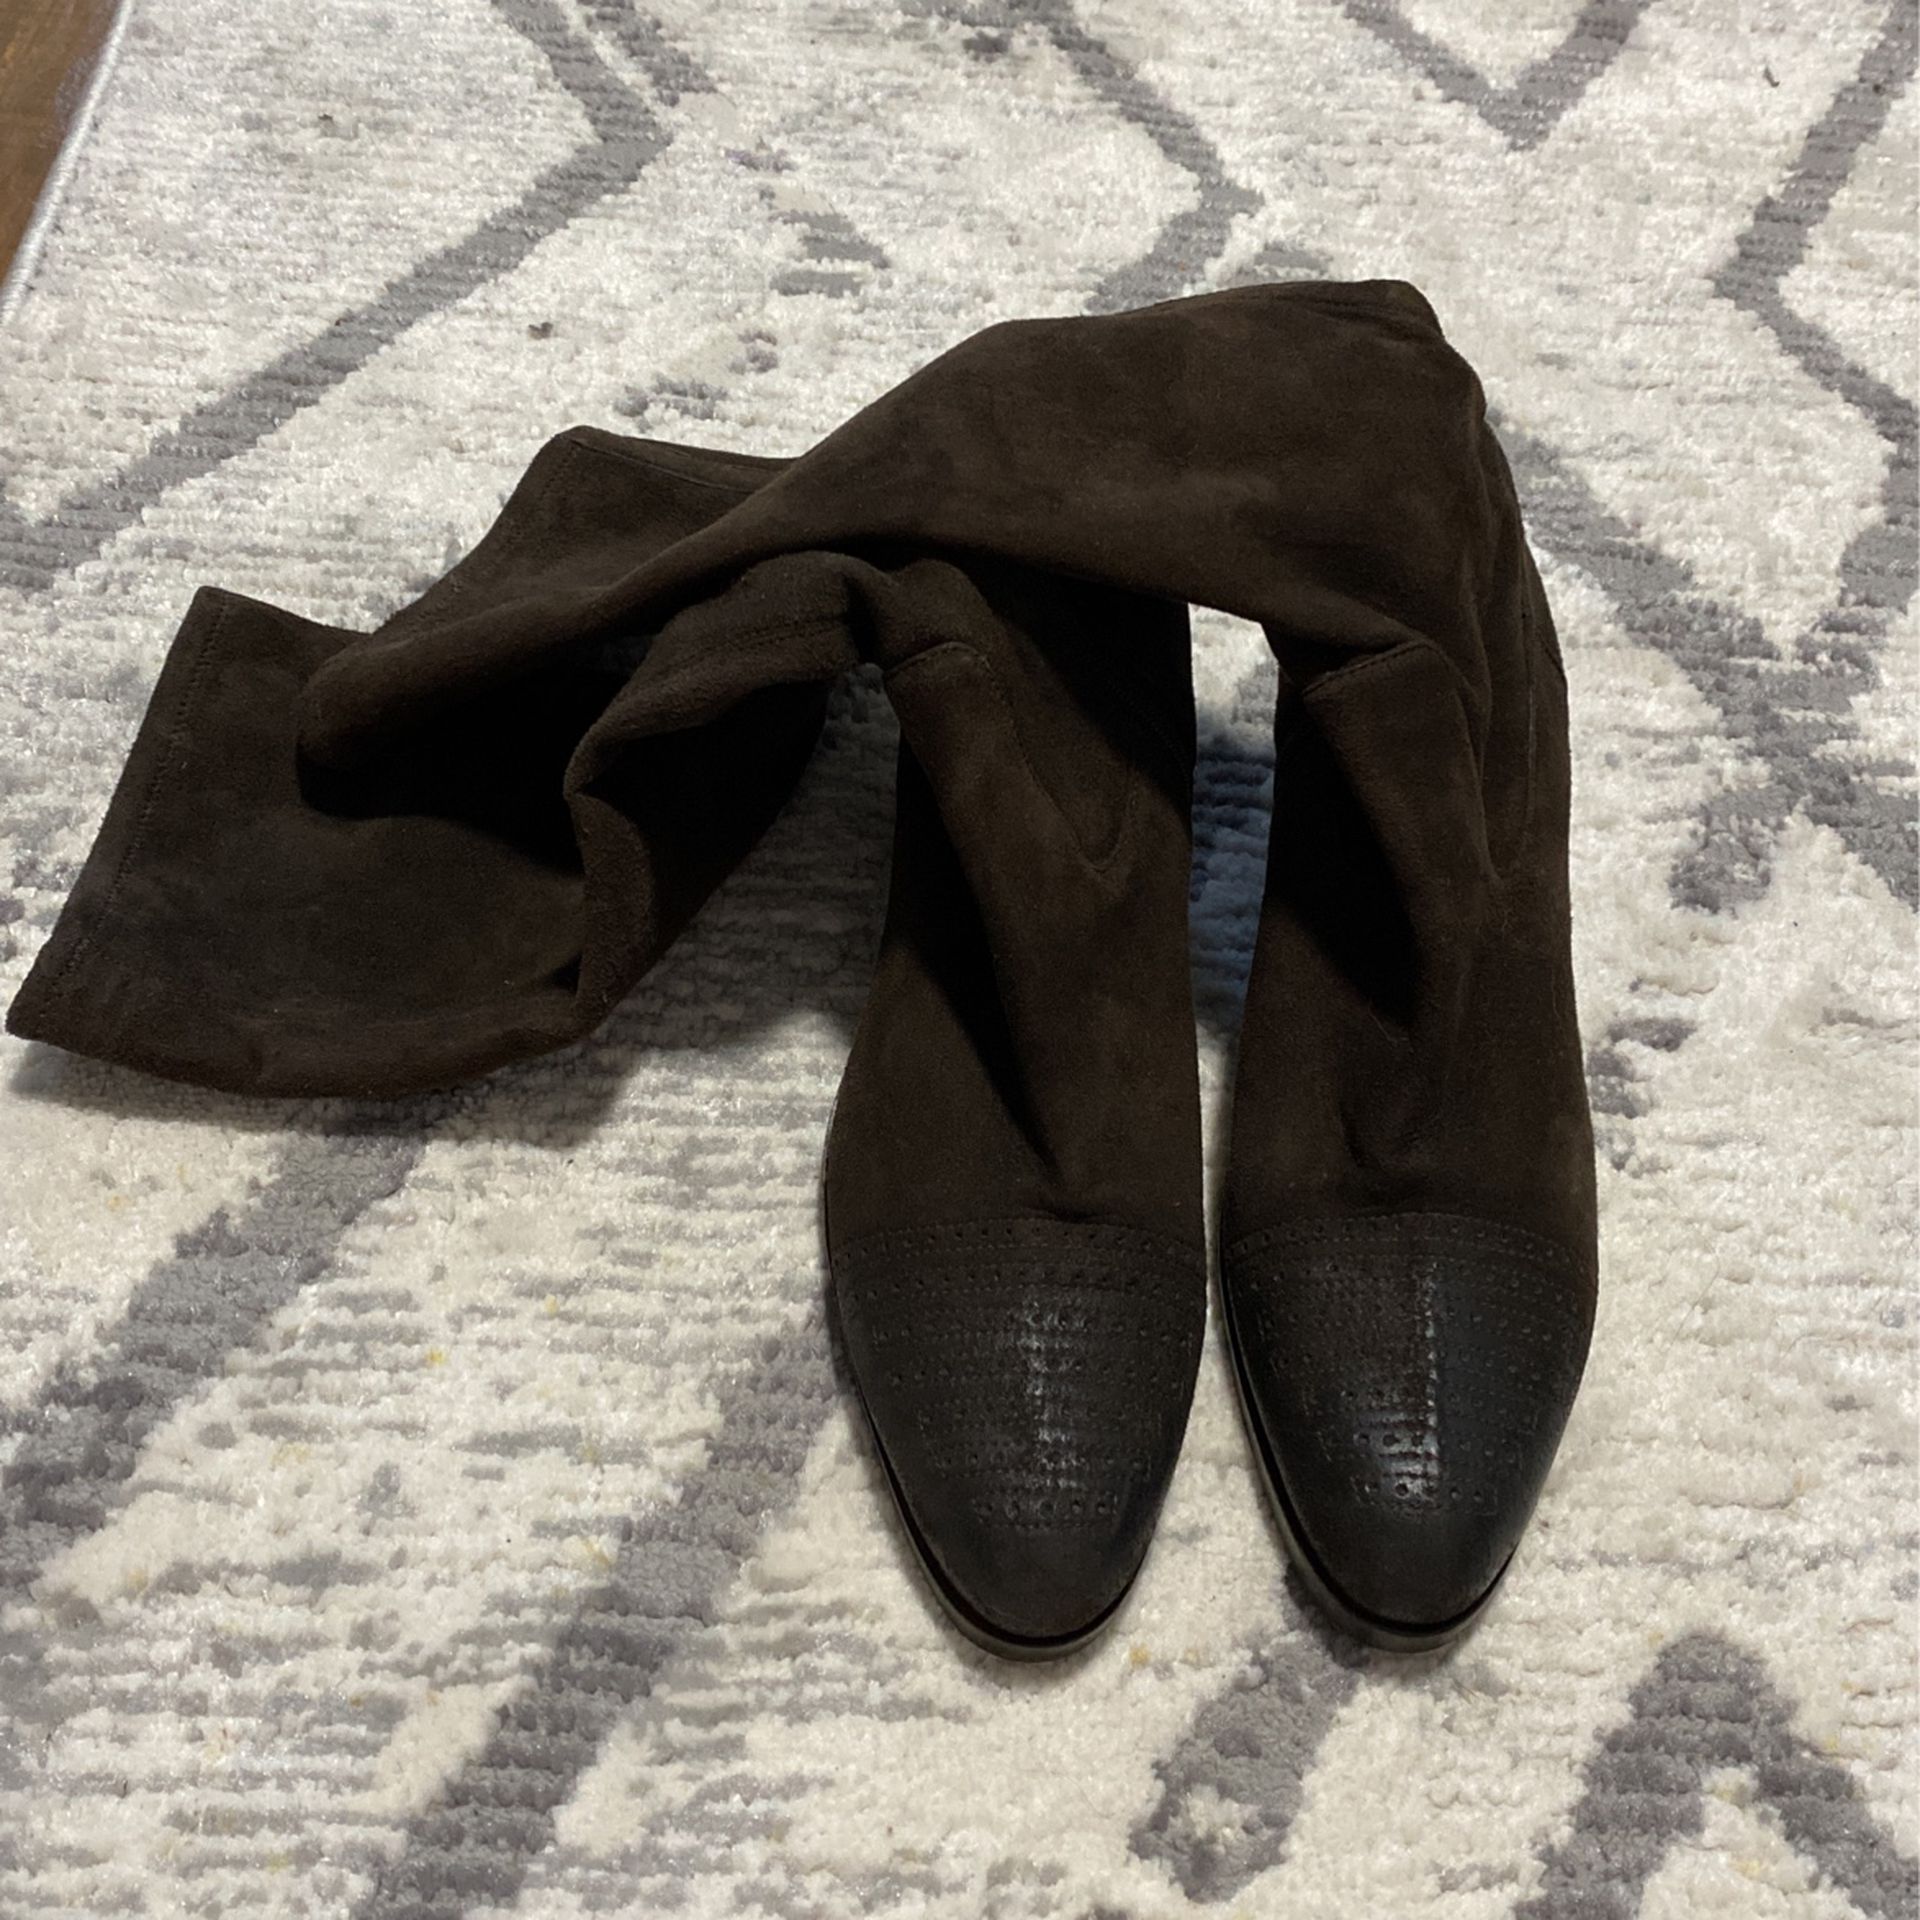 Prada Boots Suede Leather, Brown, Size 38